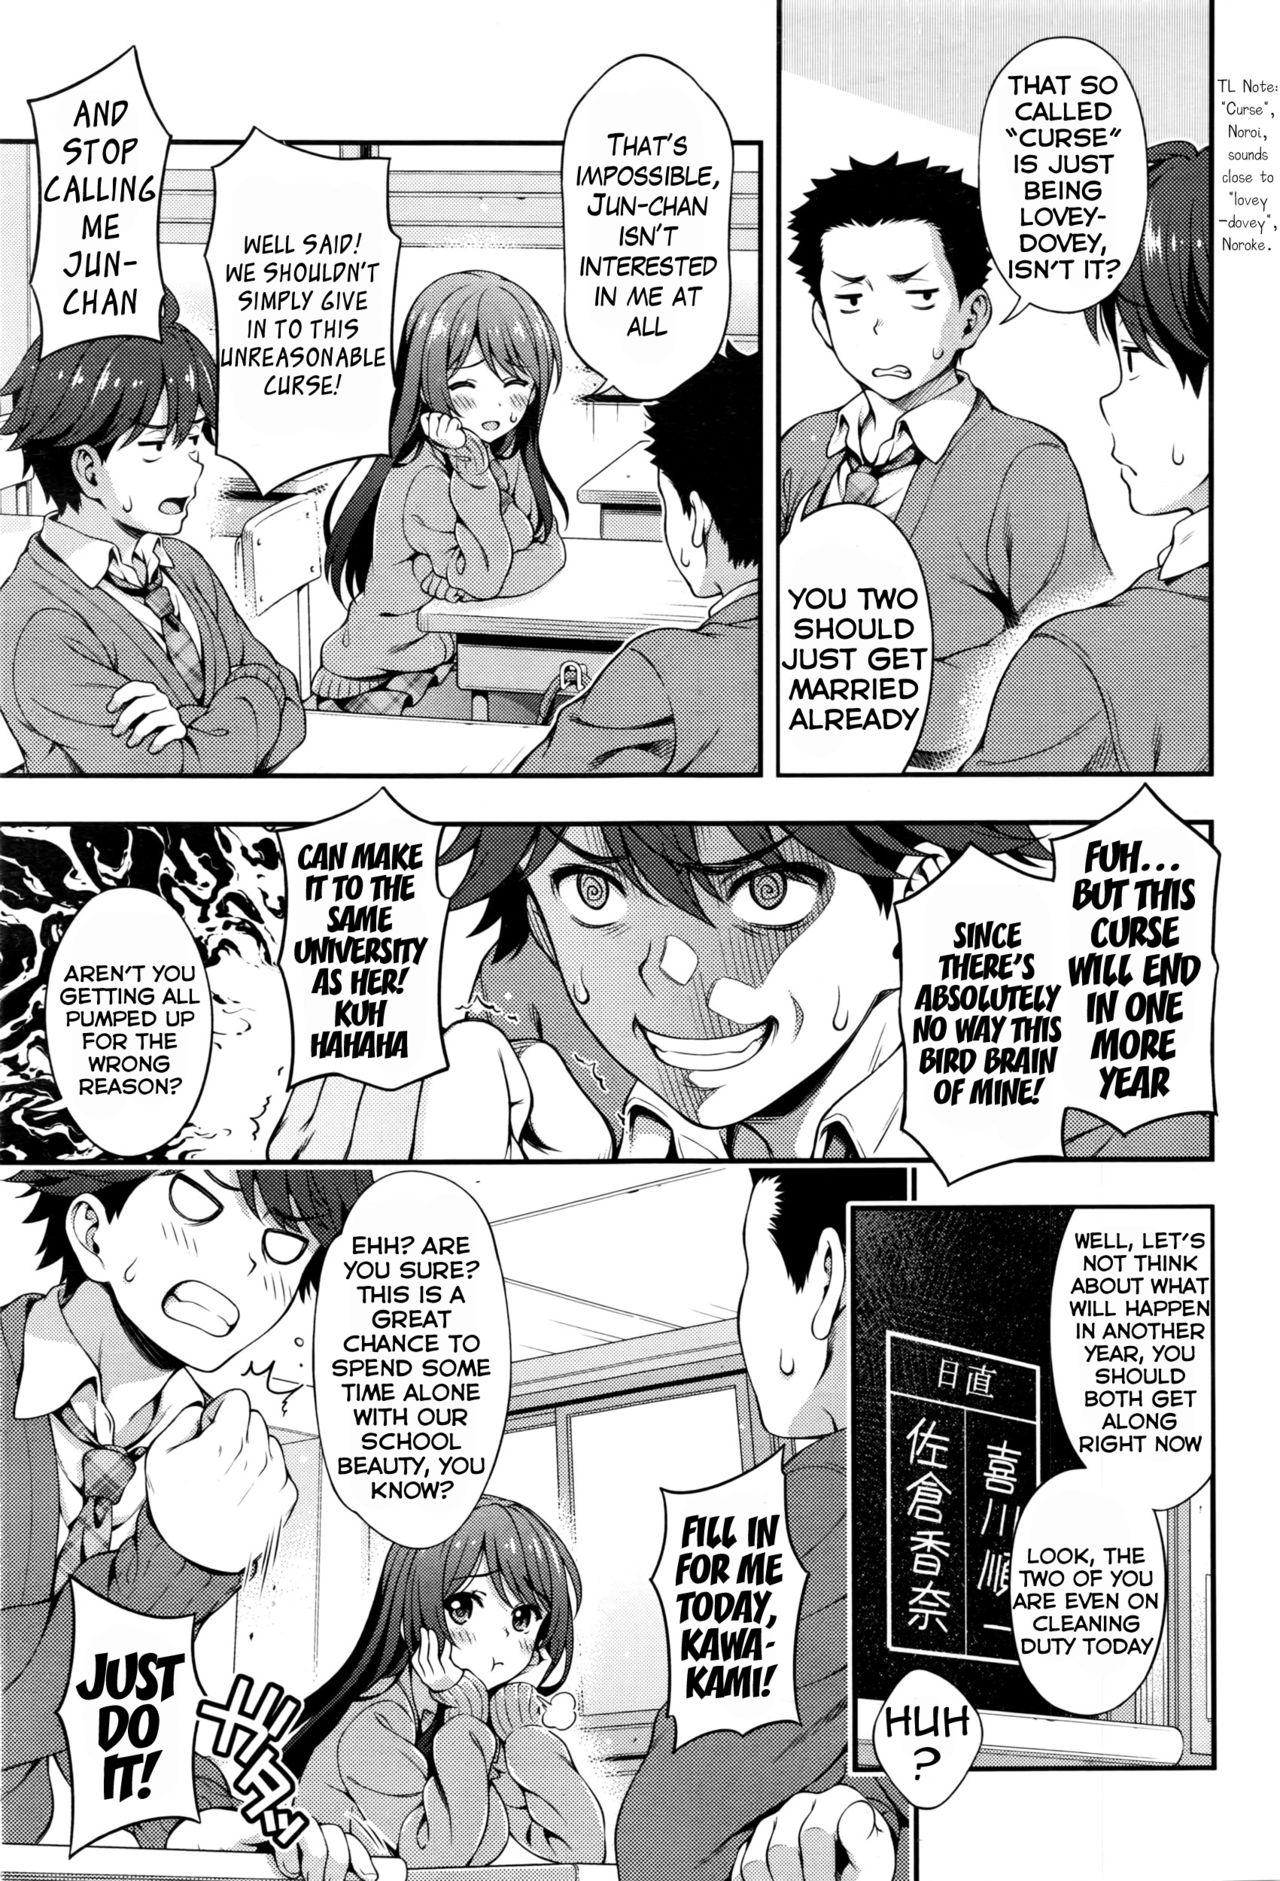 Gapes Gaping Asshole Akai Ito no Noroi | The Red String's Curse Uncensored - Page 5